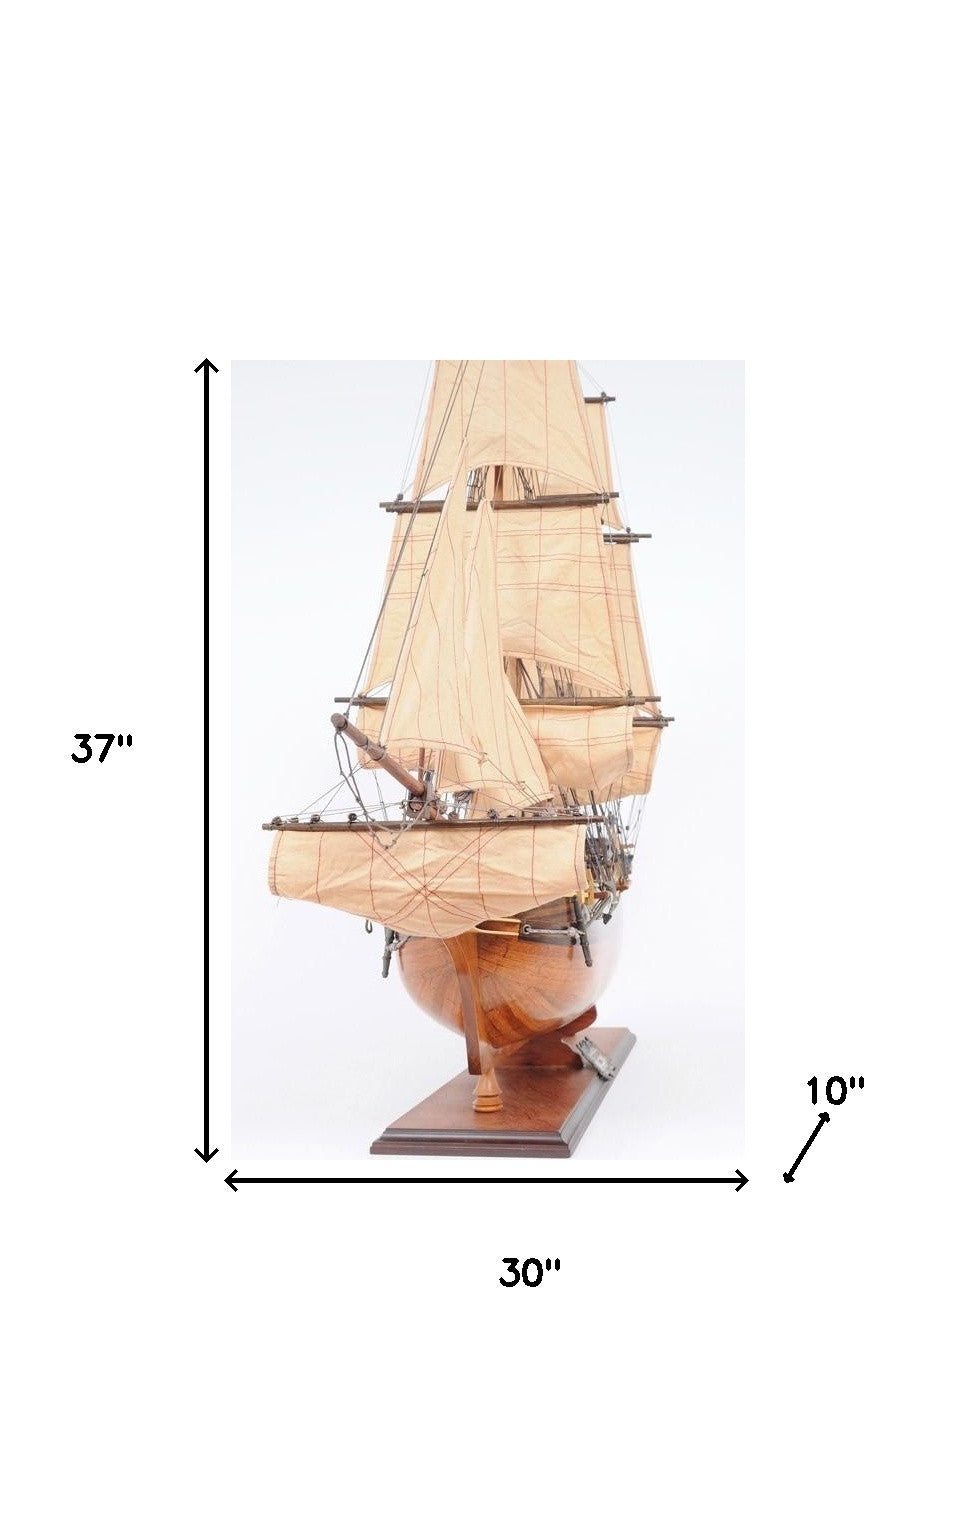 30" Wood Brown HMS Bounty 1787 Hand Painted Decorative Boat